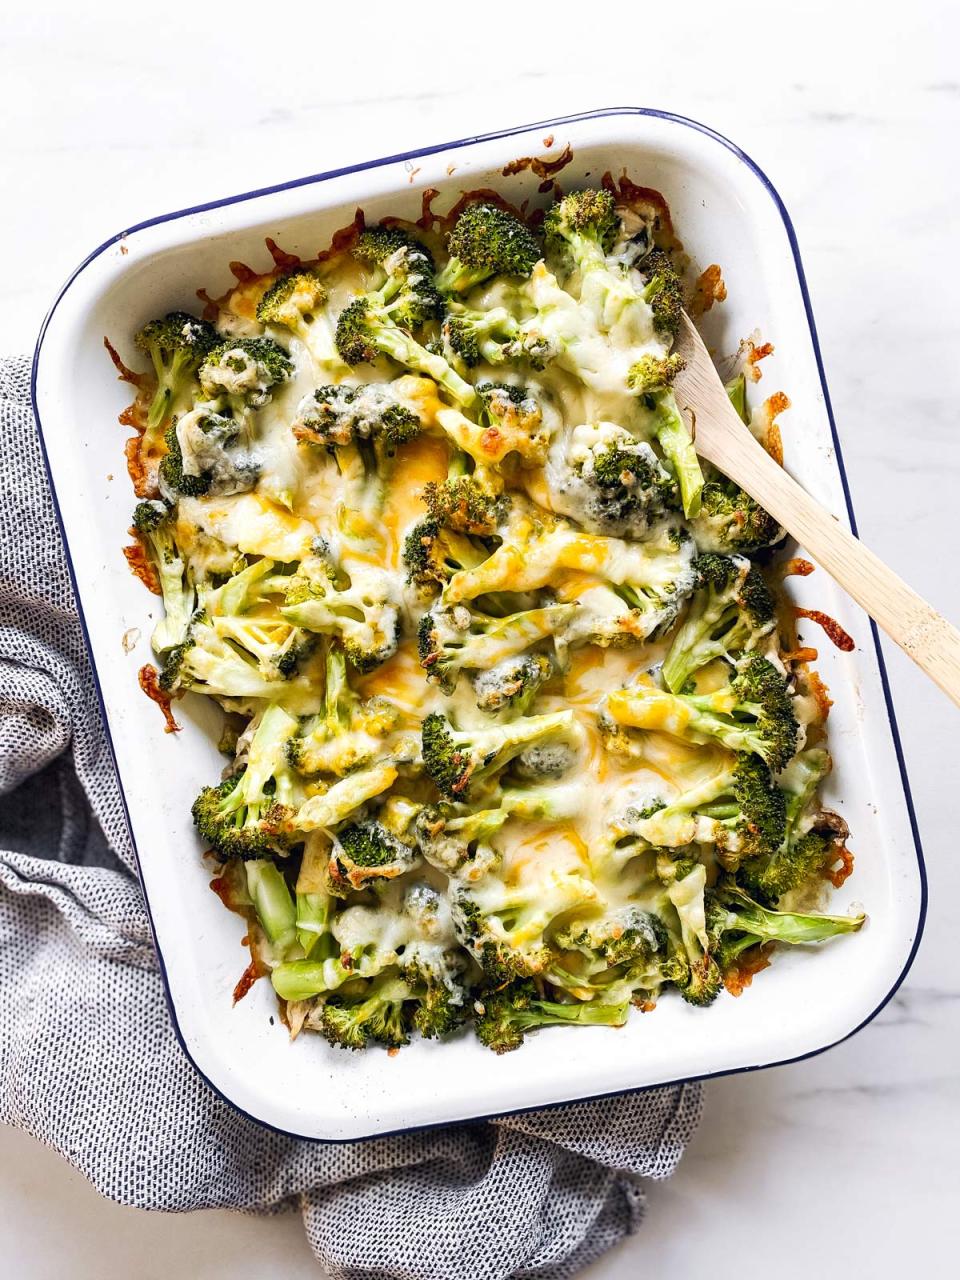 Chicken Broccoli Casserole from Scratch - Low Carb, Keto, THM S